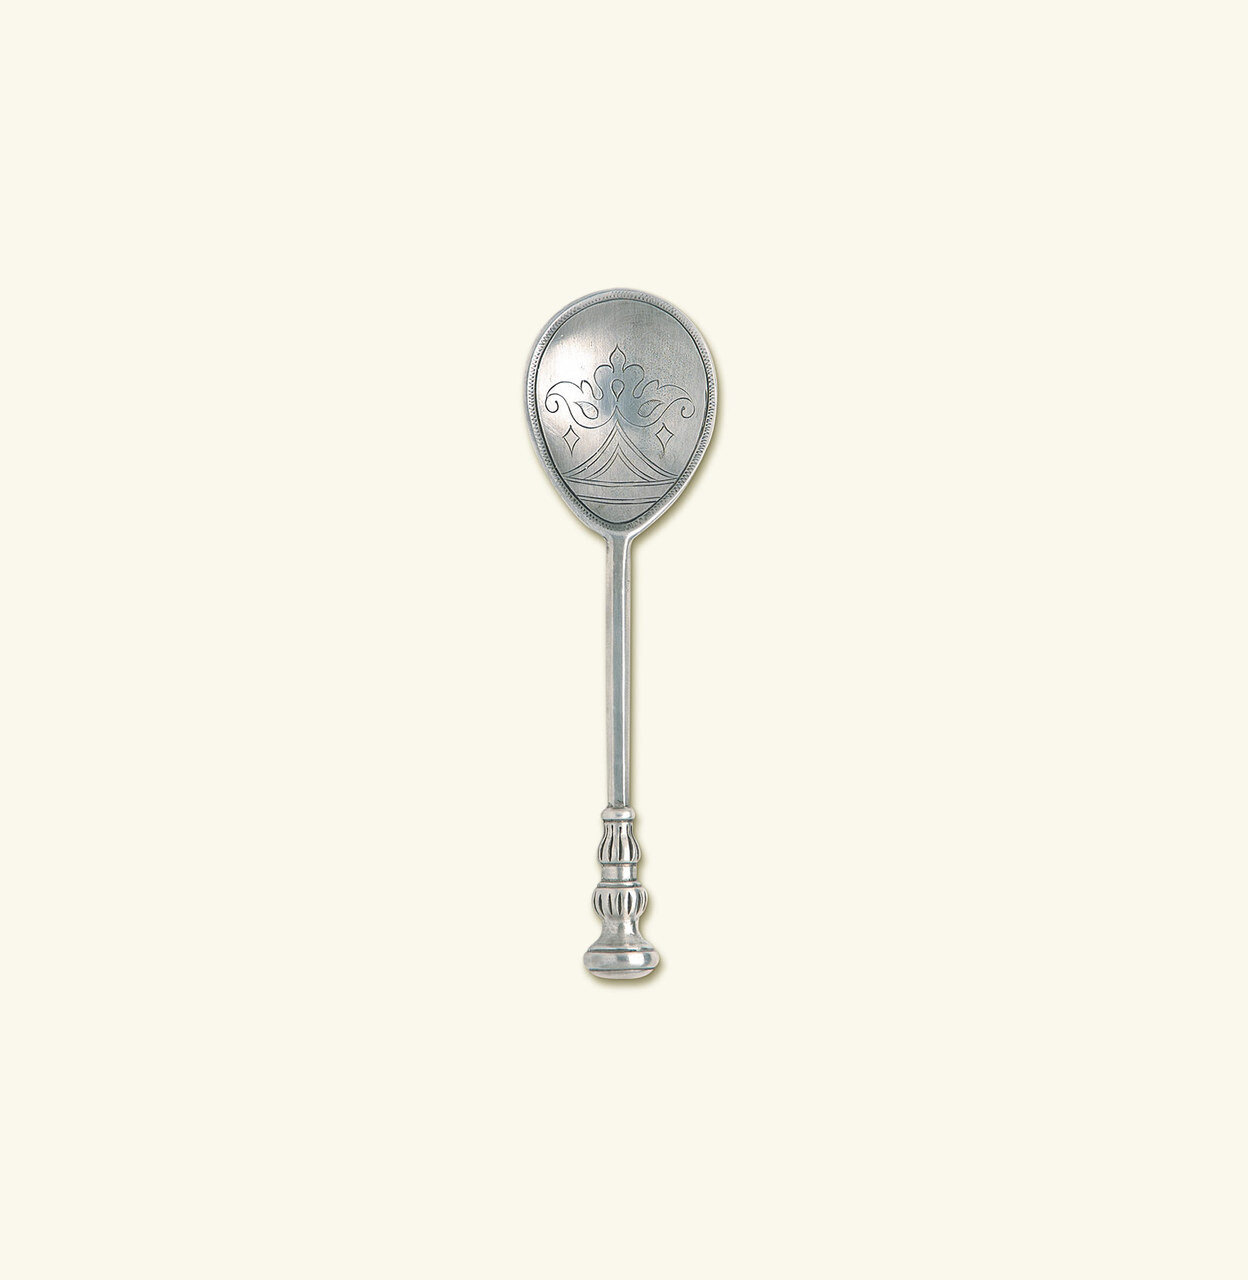 Match Pewter Cavalier Spoon a2995.0